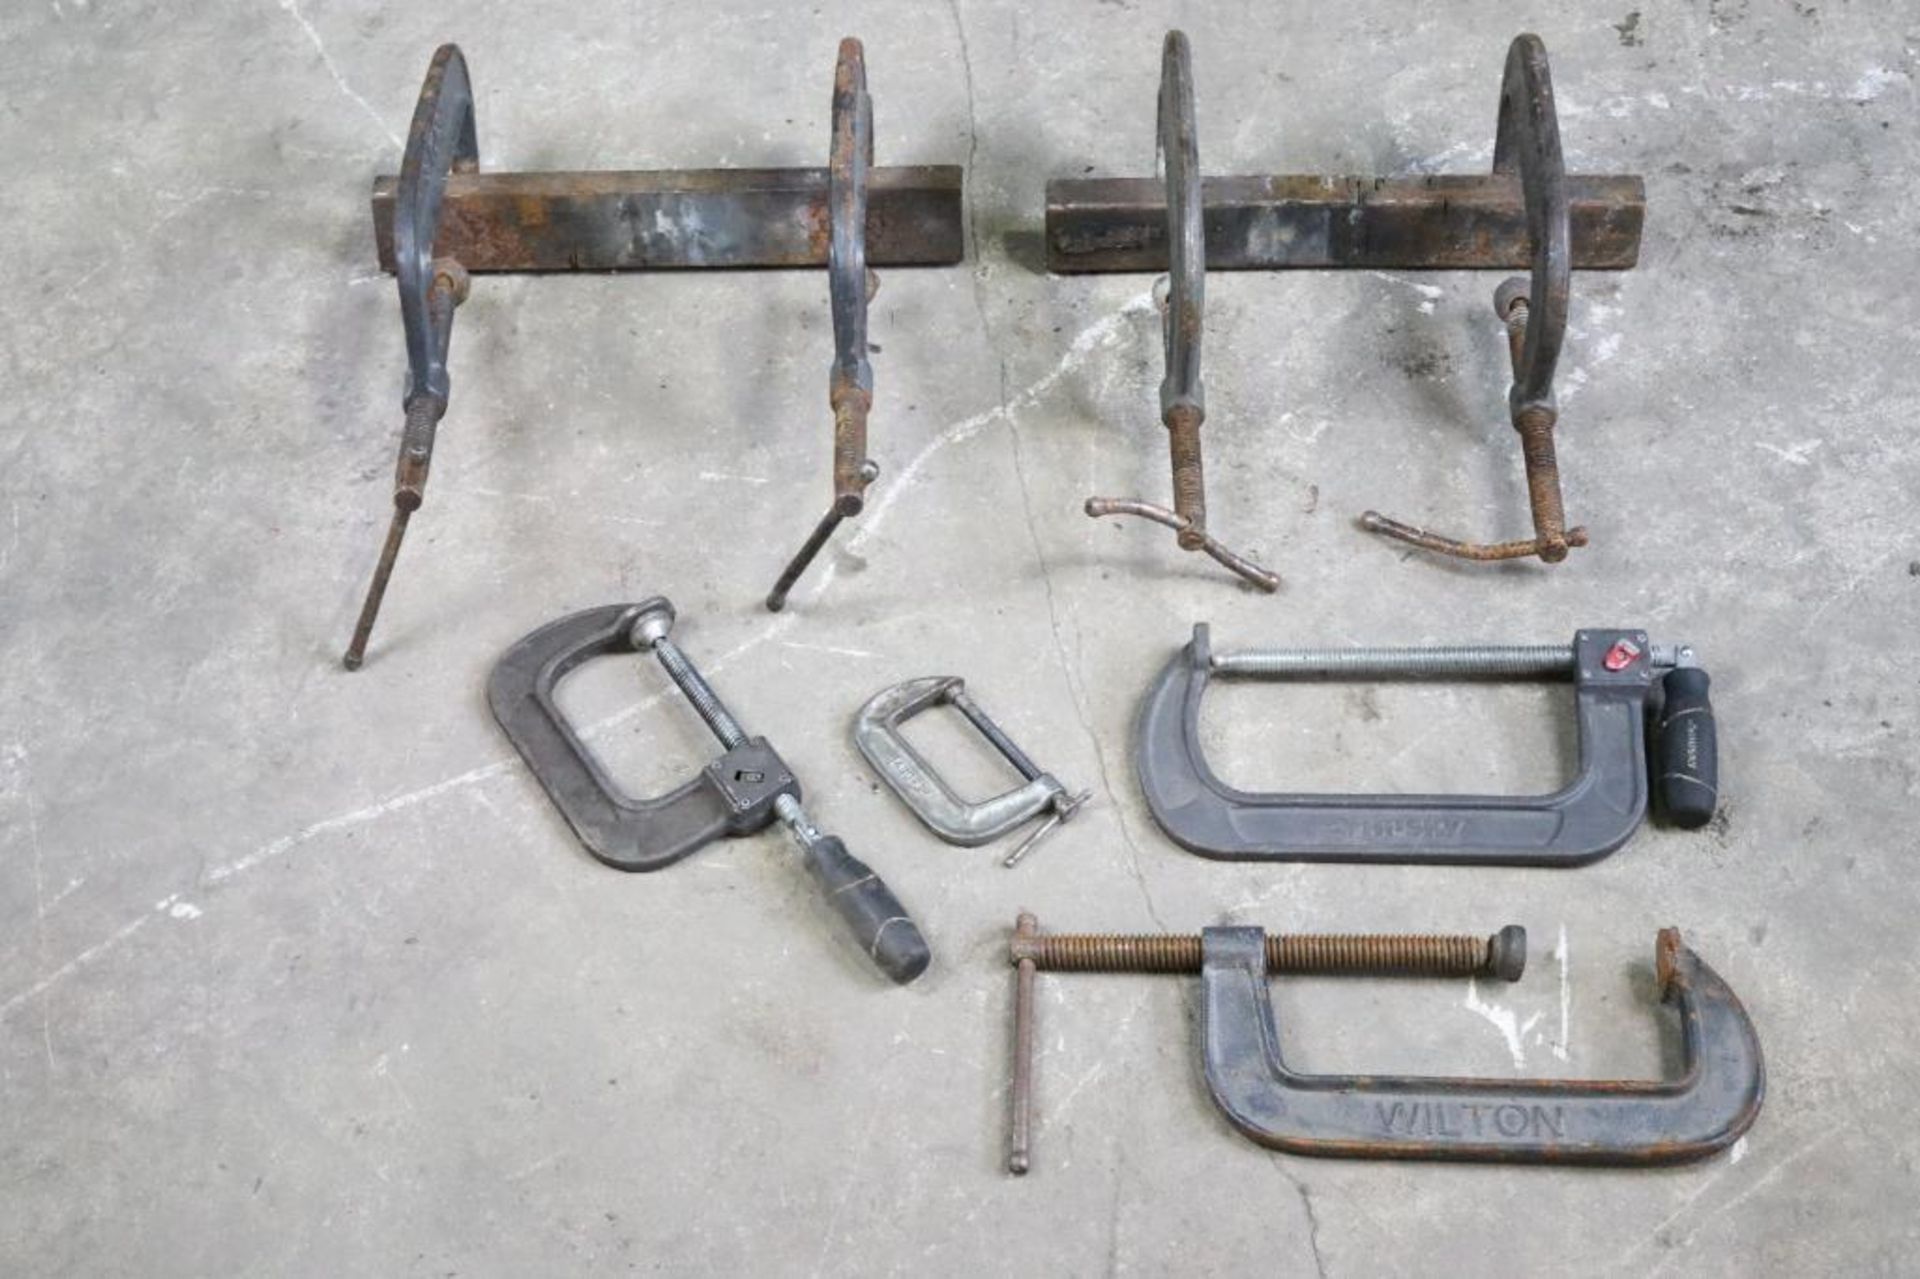 Assortment of "C" Clamps